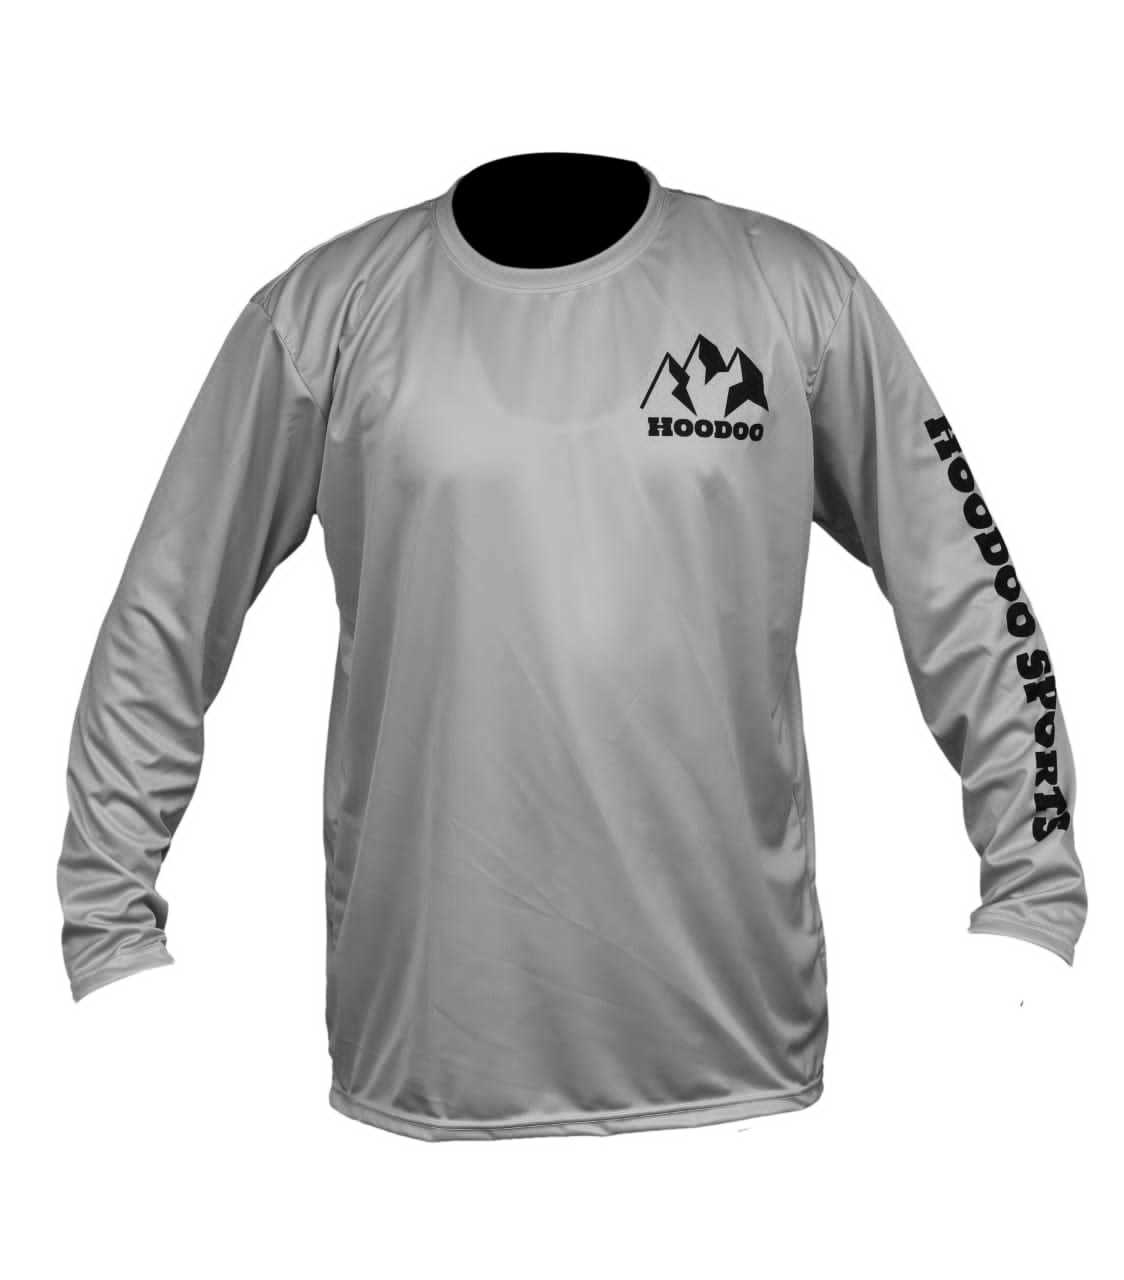 White Long Sleeve Fishing Shirts & Tops for sale